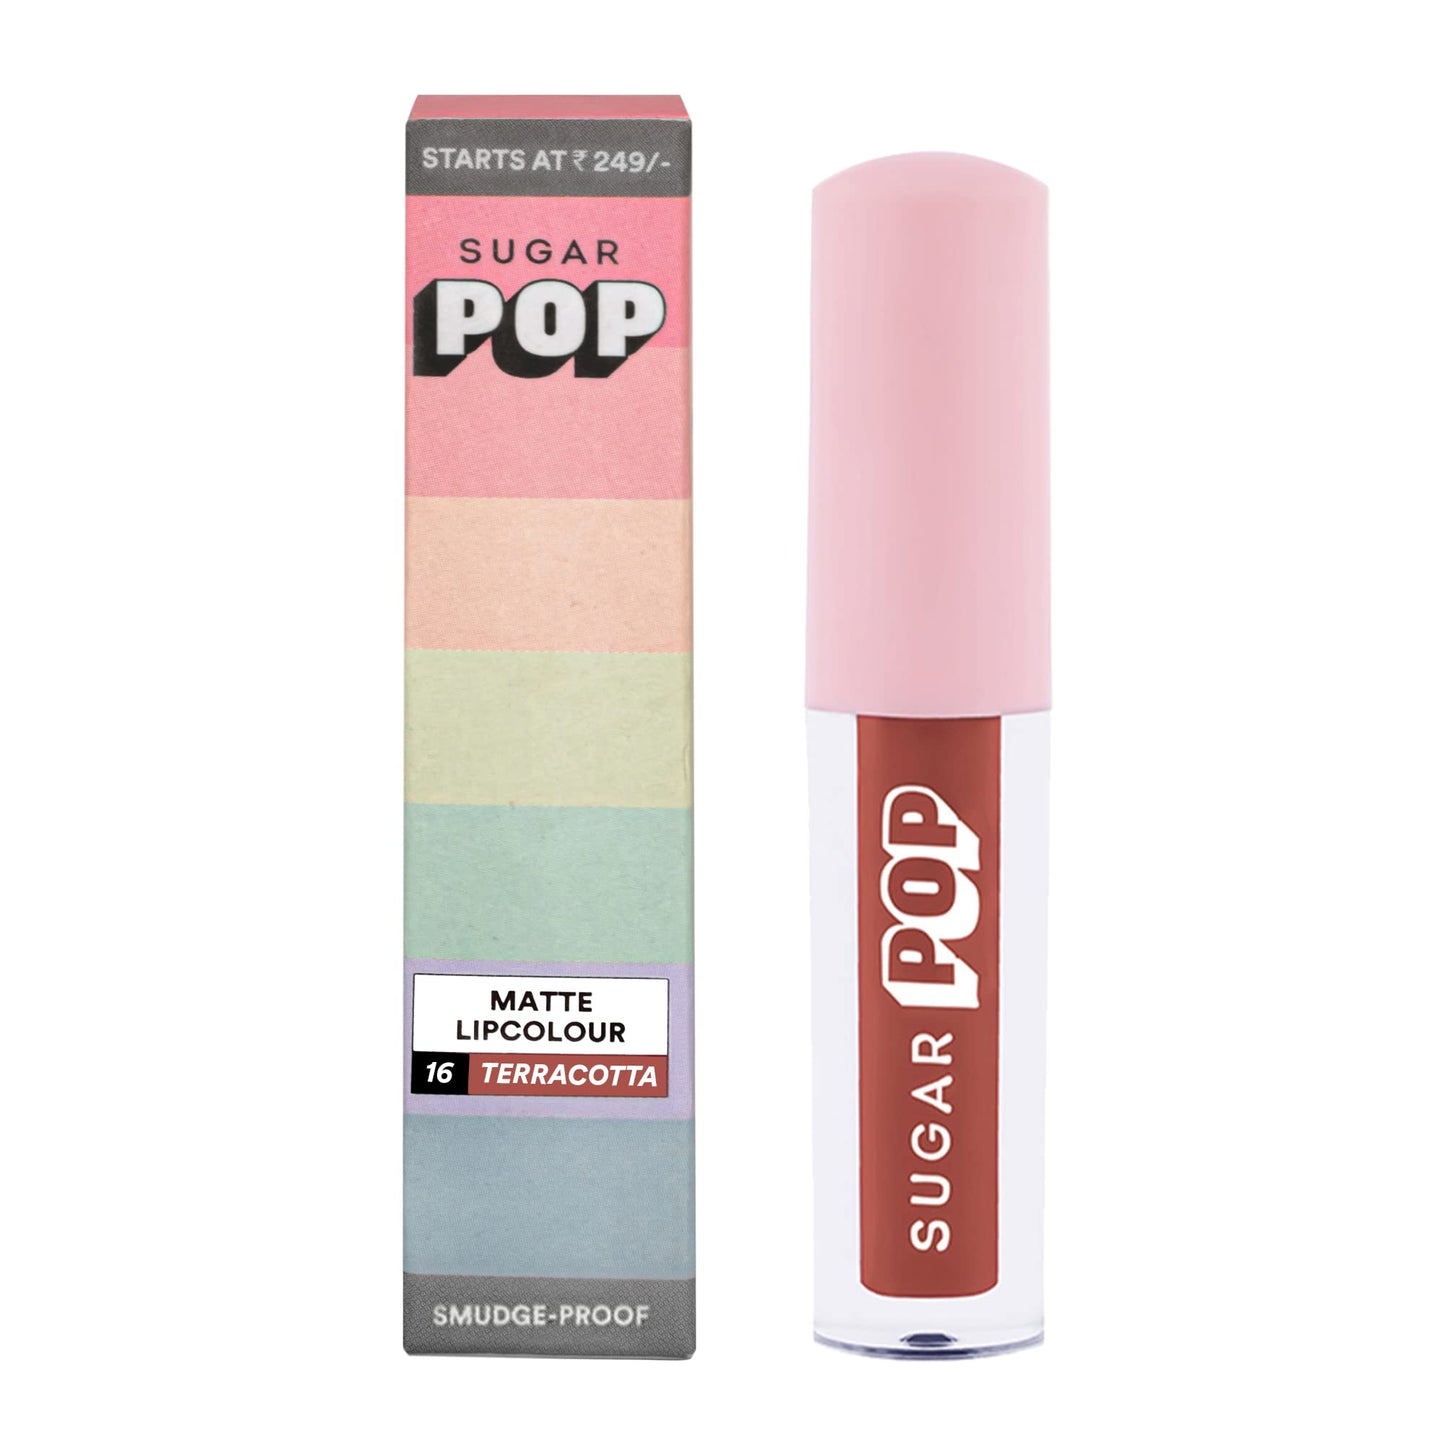 SUGAR POP 2 in 1 Matte Lipcolour Combo, Richly pigmented, Long-lasting, Ultra Matte, Smudge-Proof,10 Rosewood & 16 Terracotta, Super Lip Kit Combo